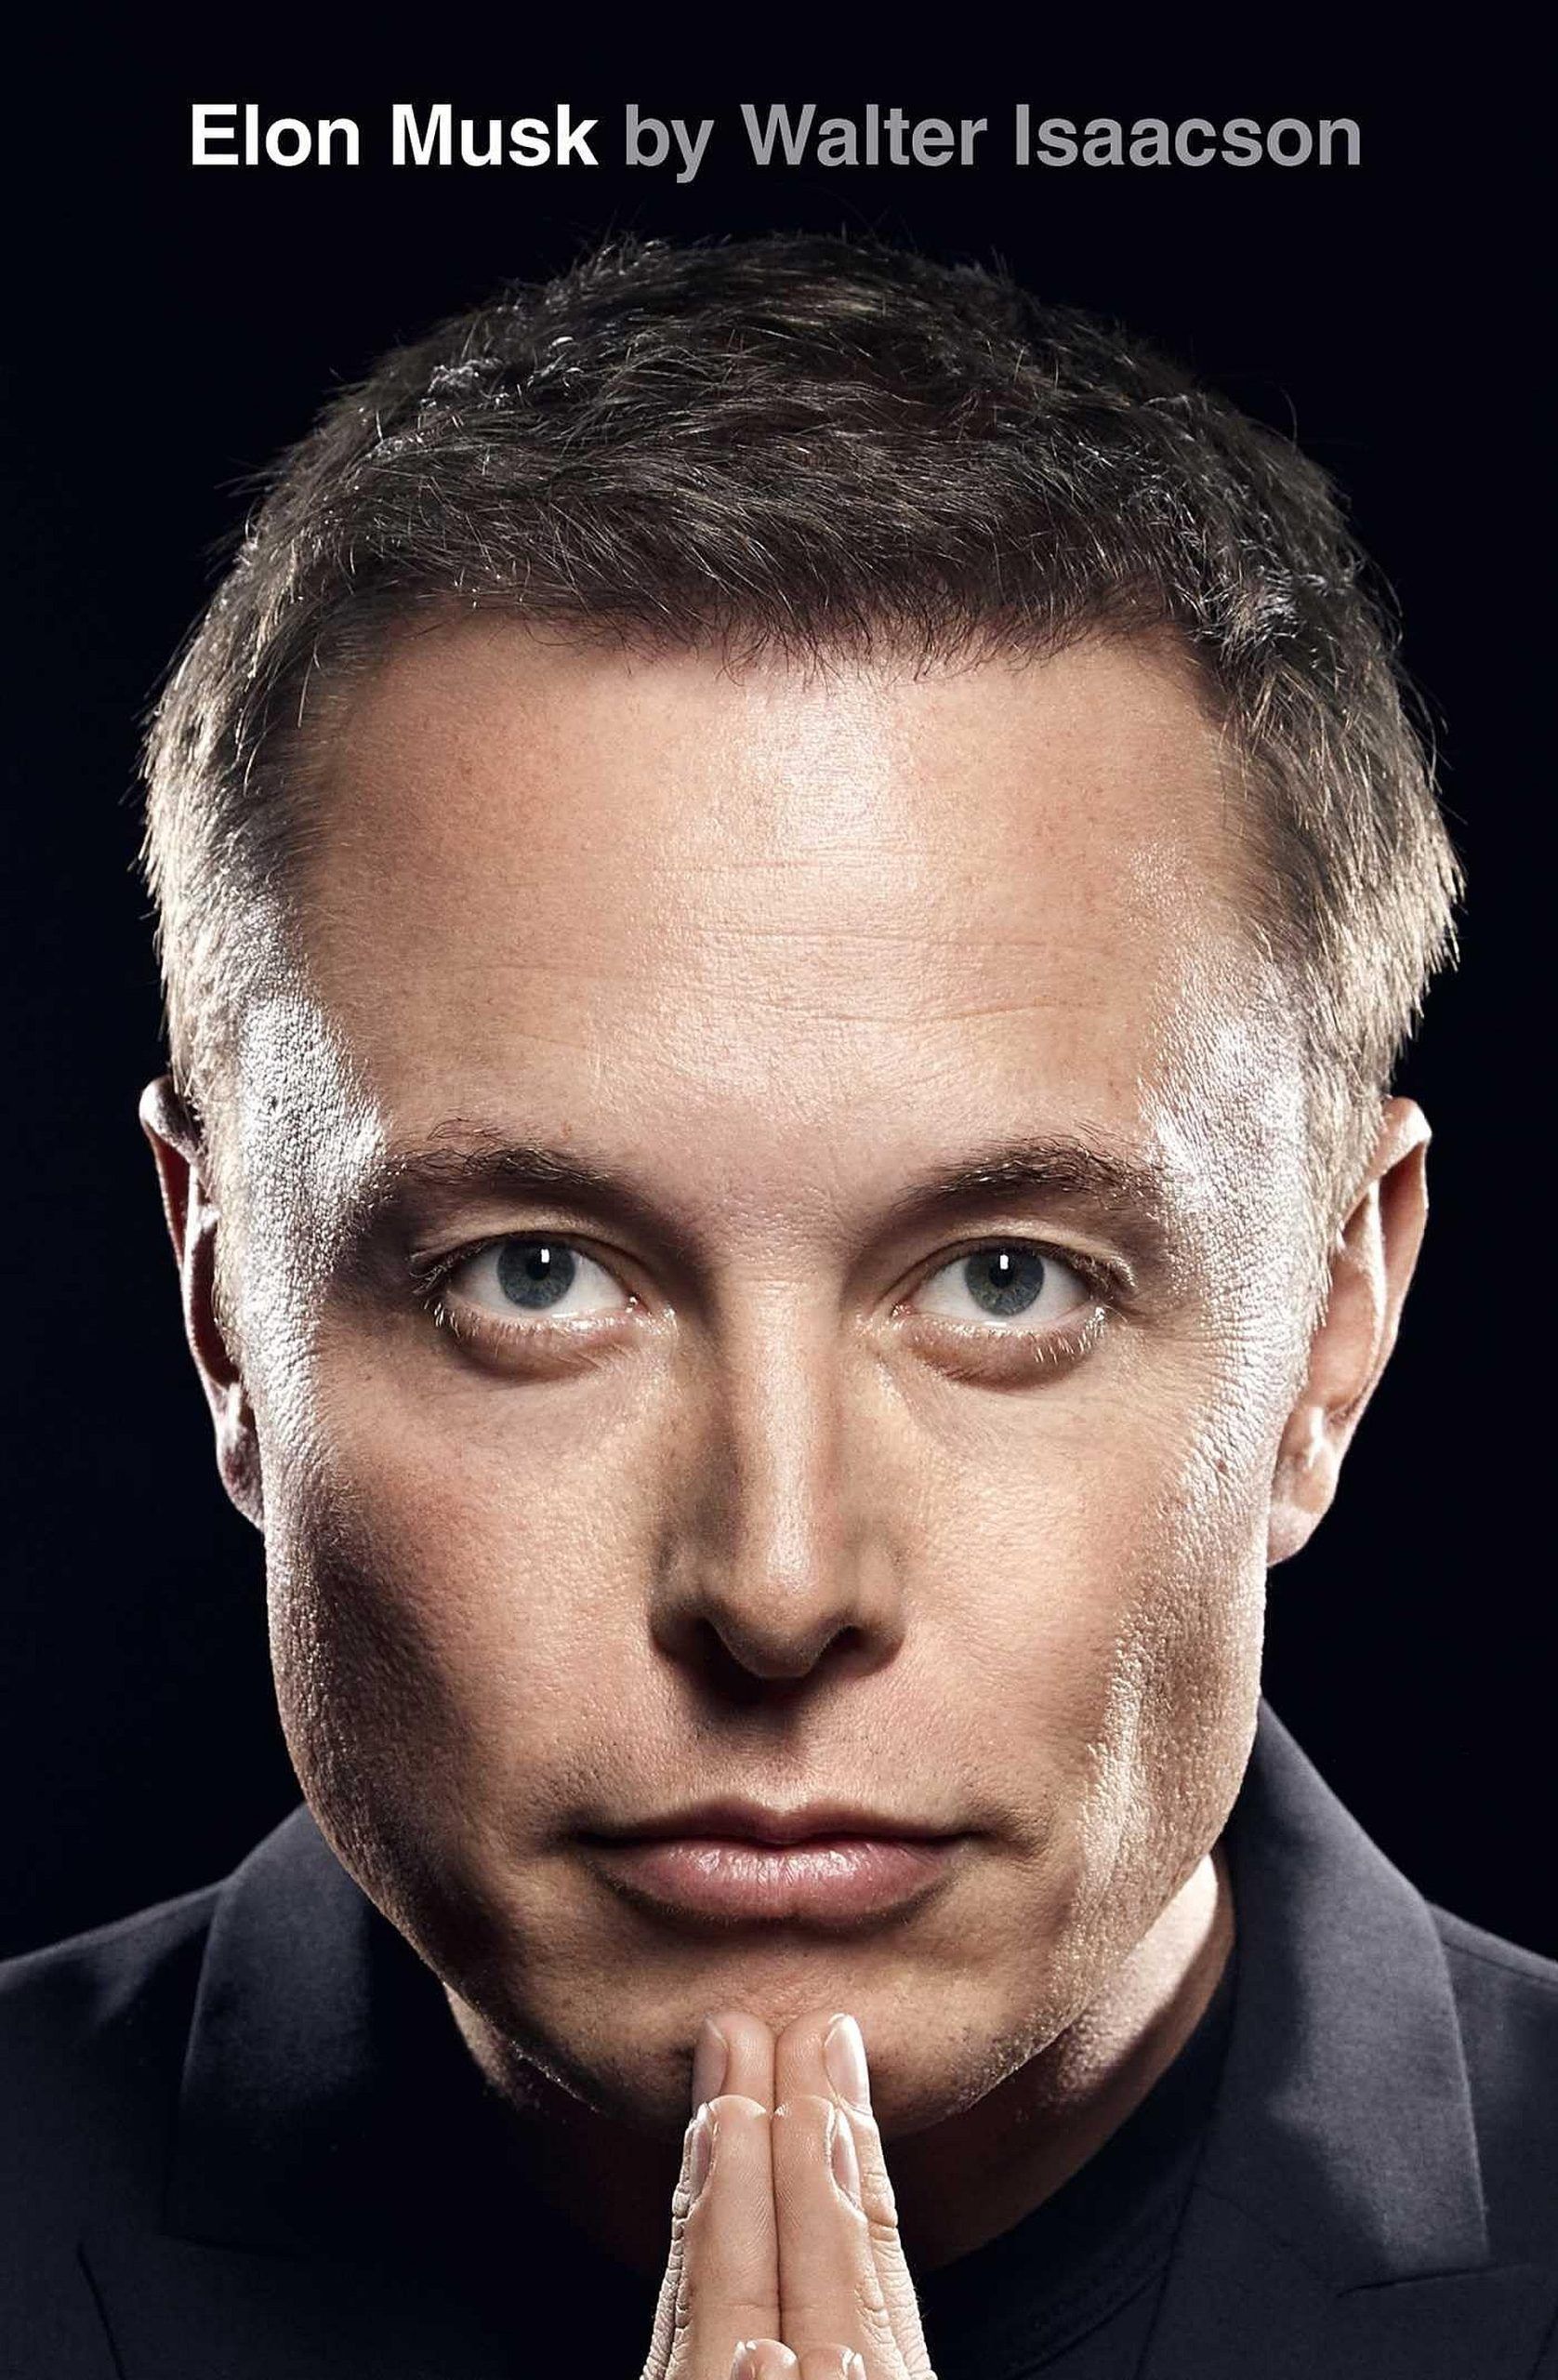 Discover Elon Musk's surprising decision to shut down Starlink during Ukraine crisis, according to Walter Isaacson's Elon Musk biography.